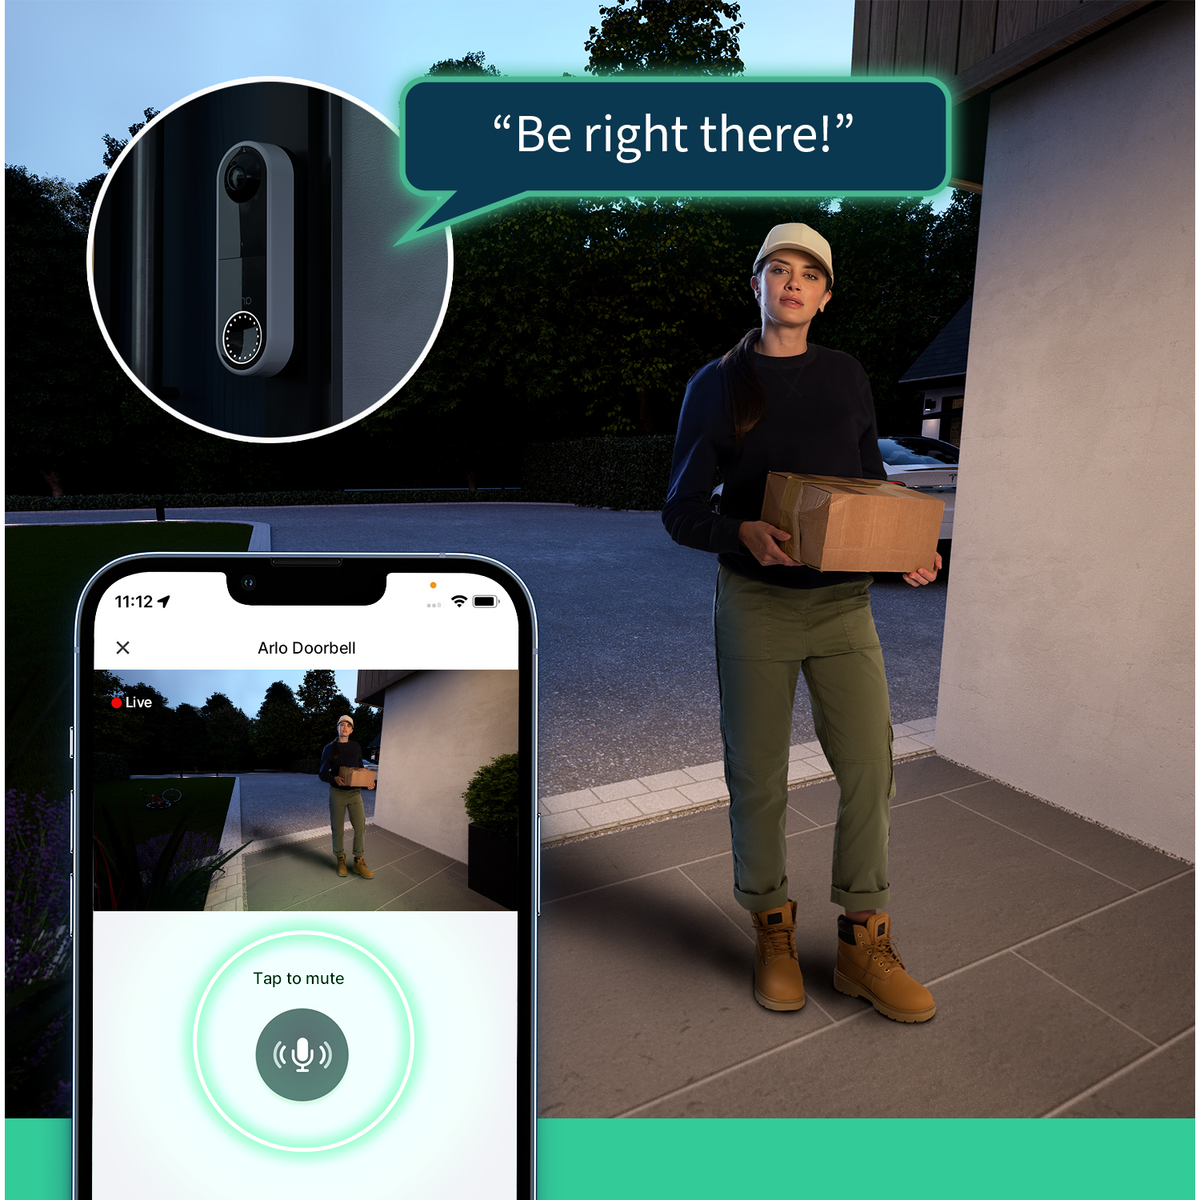 Arlo 1080p Essential Wire Free Video Doorbell - White | AVD2001100EUS from Arlo - DID Electrical